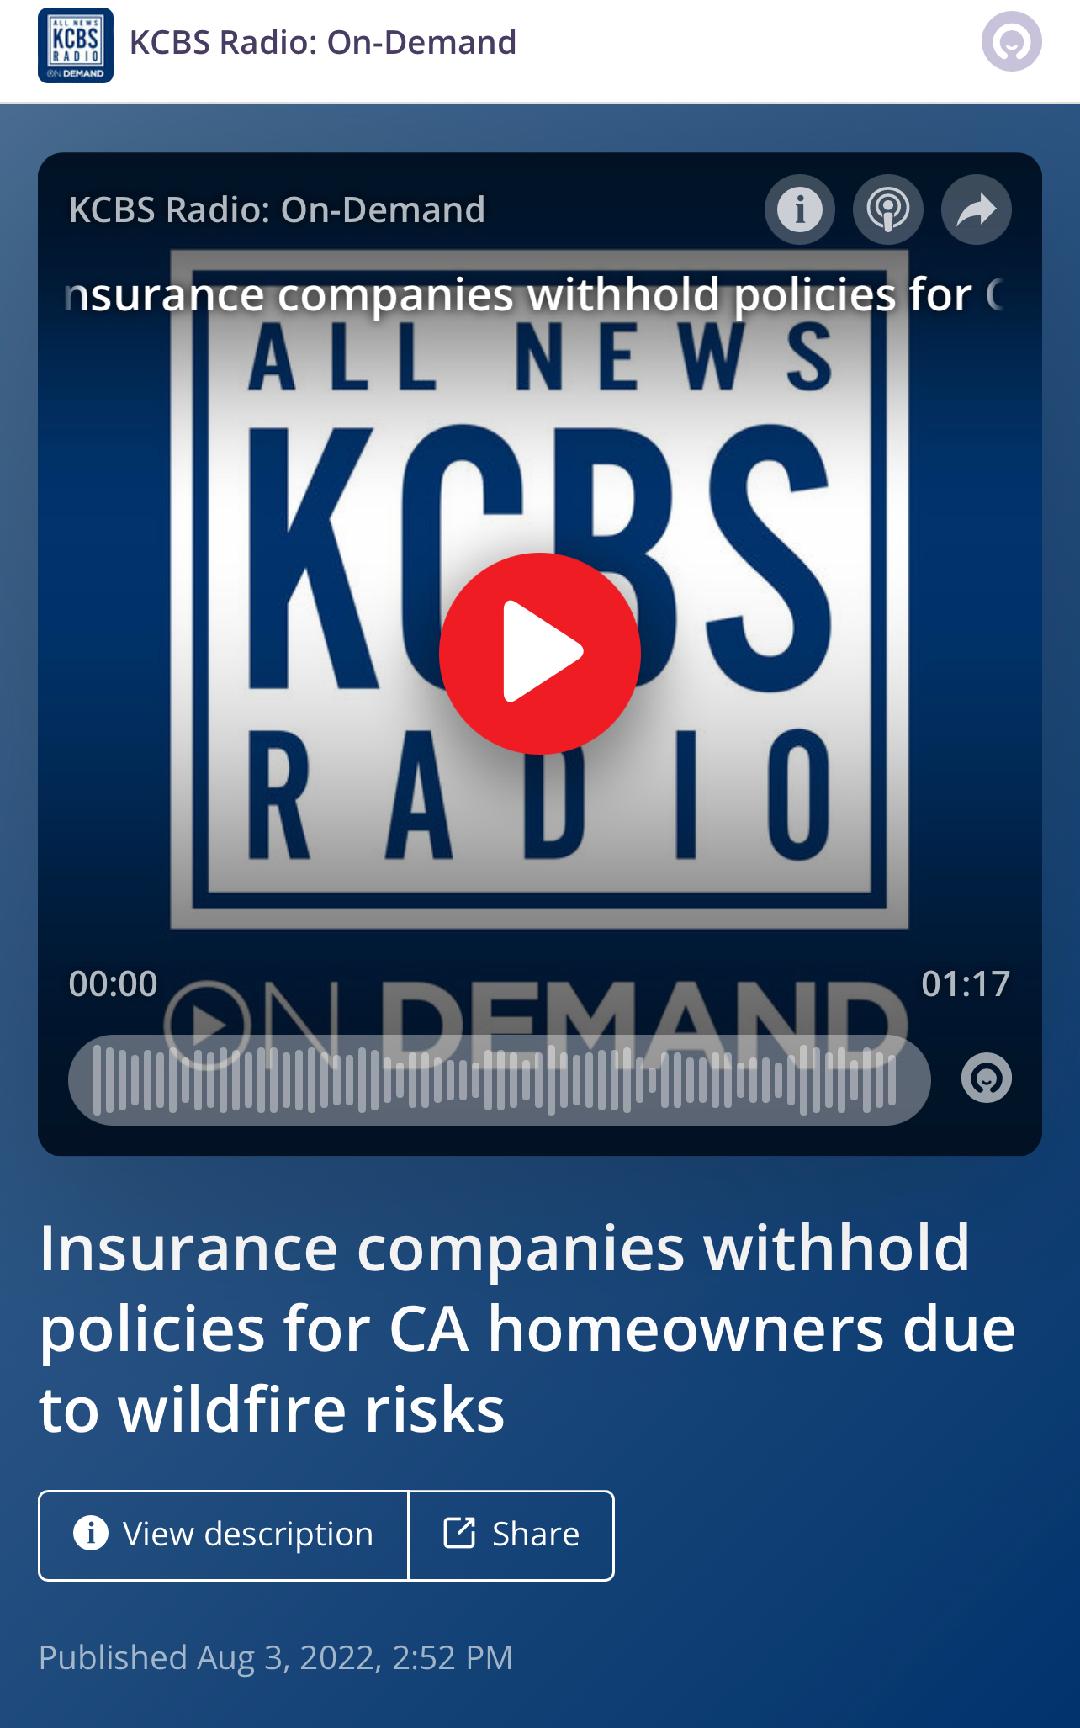 Radio Appearance on KCBS: Insurance Companies Withhold Policies for California Homeowners Due to Wildfire Risks